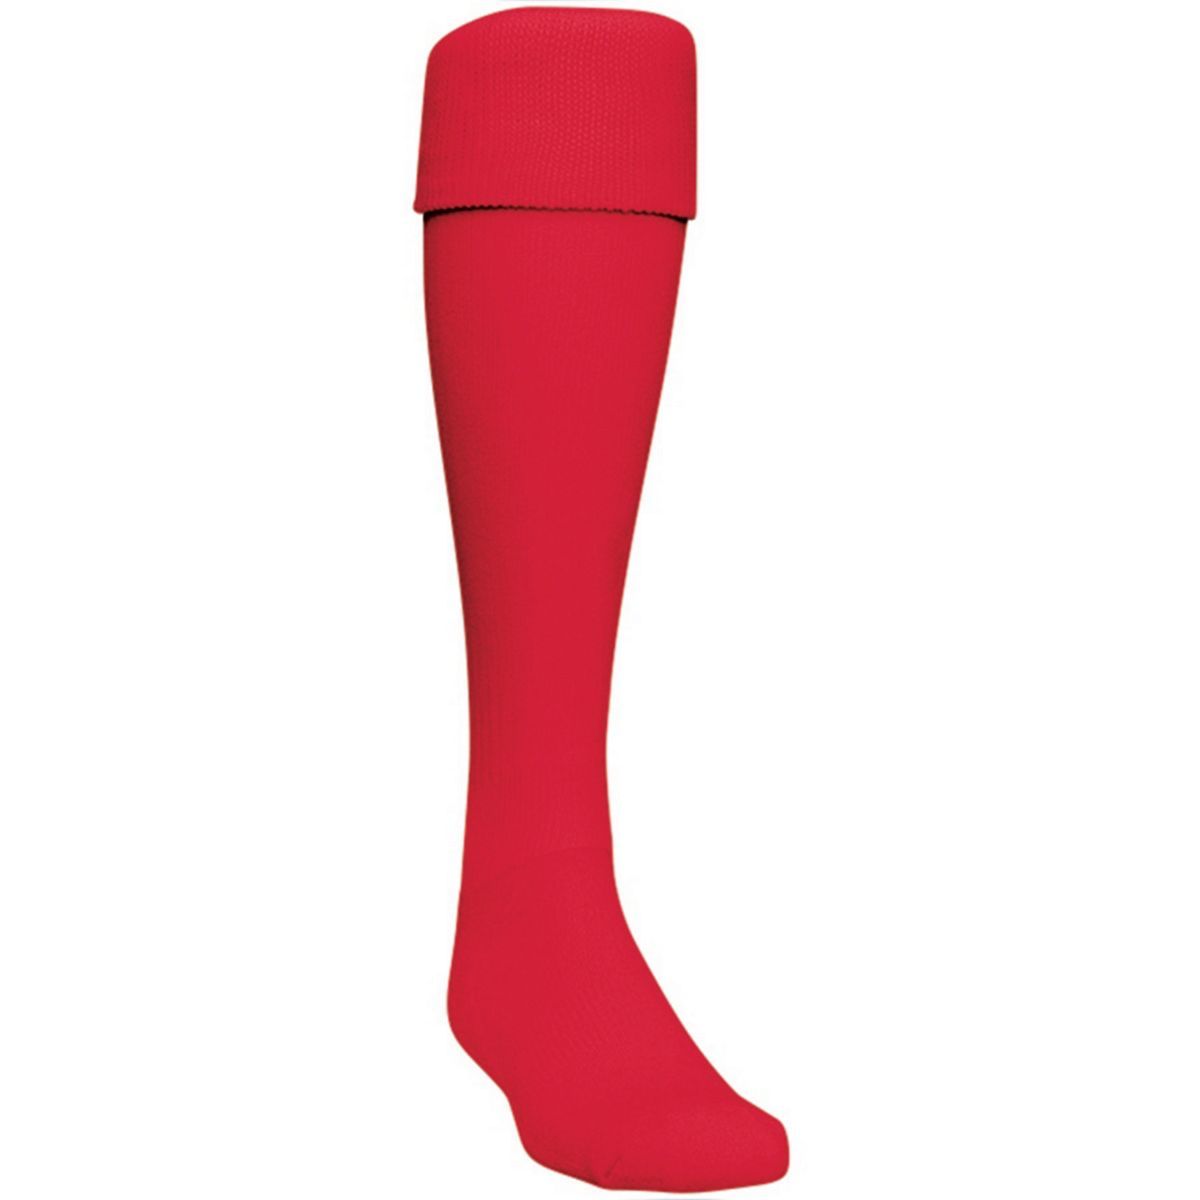 High 5 Sport Sock in Scarlet  -Part of the Accessories, High5-Products, Accessories-Socks product lines at KanaleyCreations.com